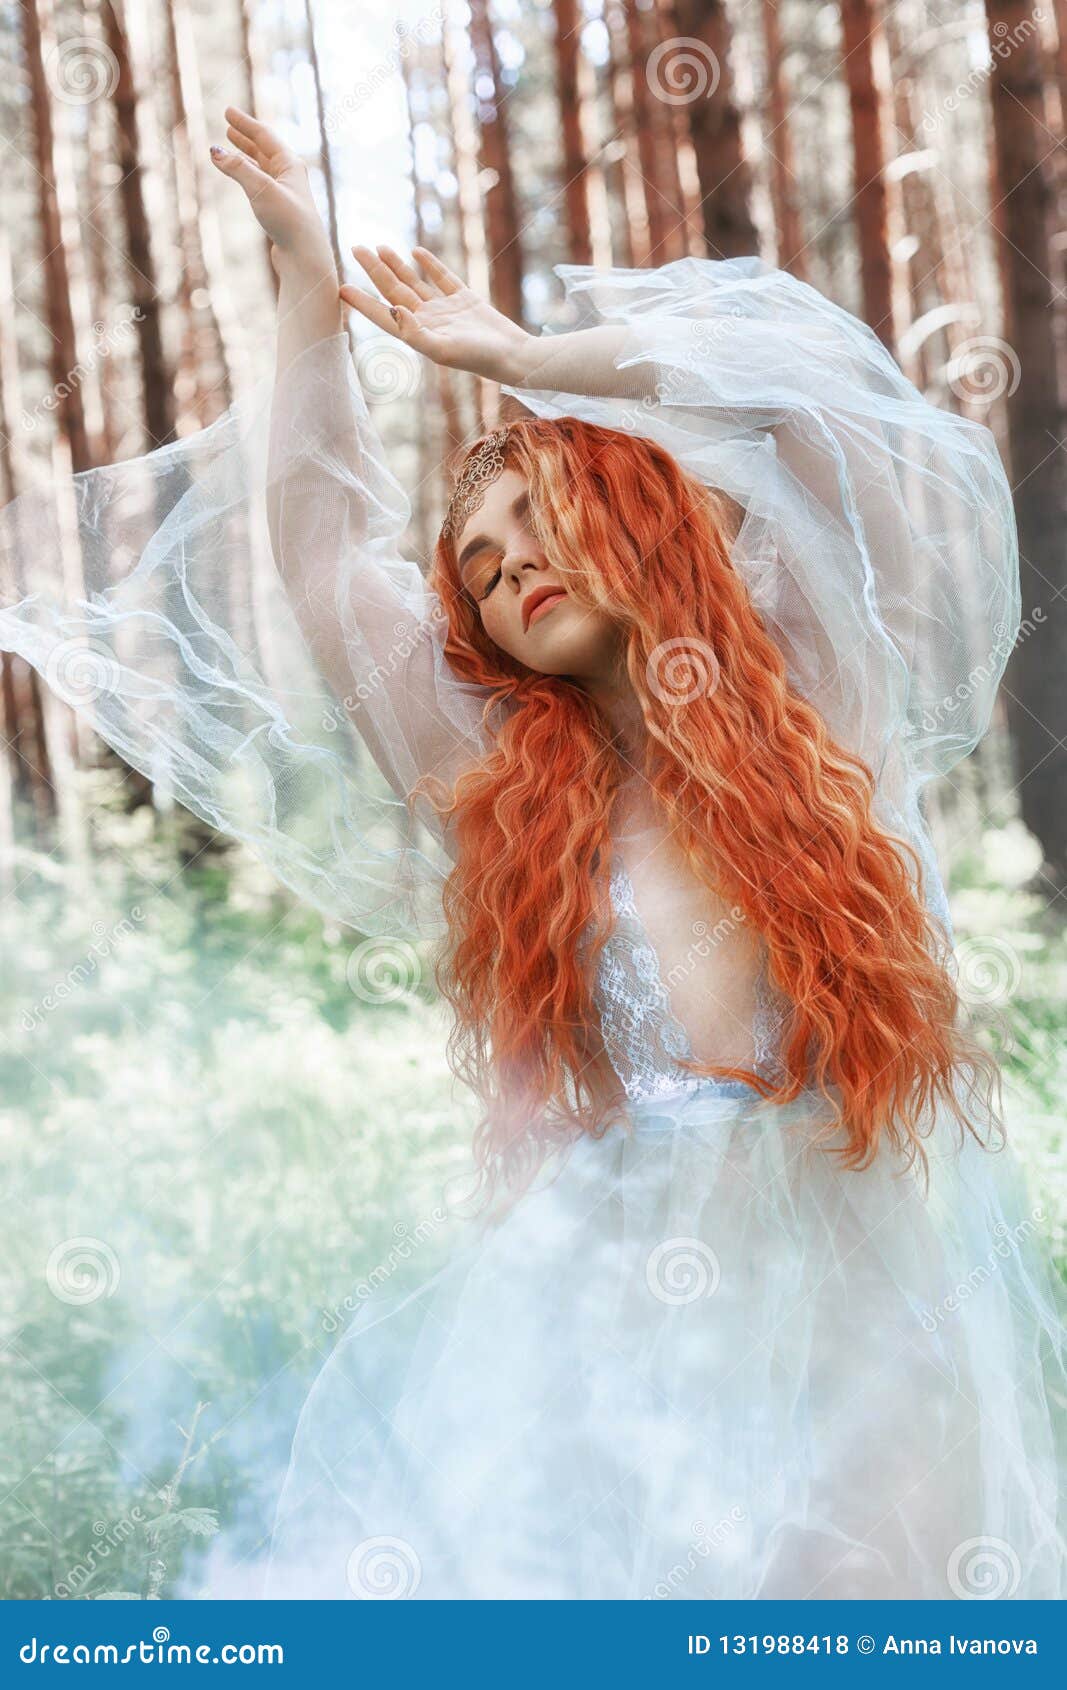 Sexy nude nymph forest fairy